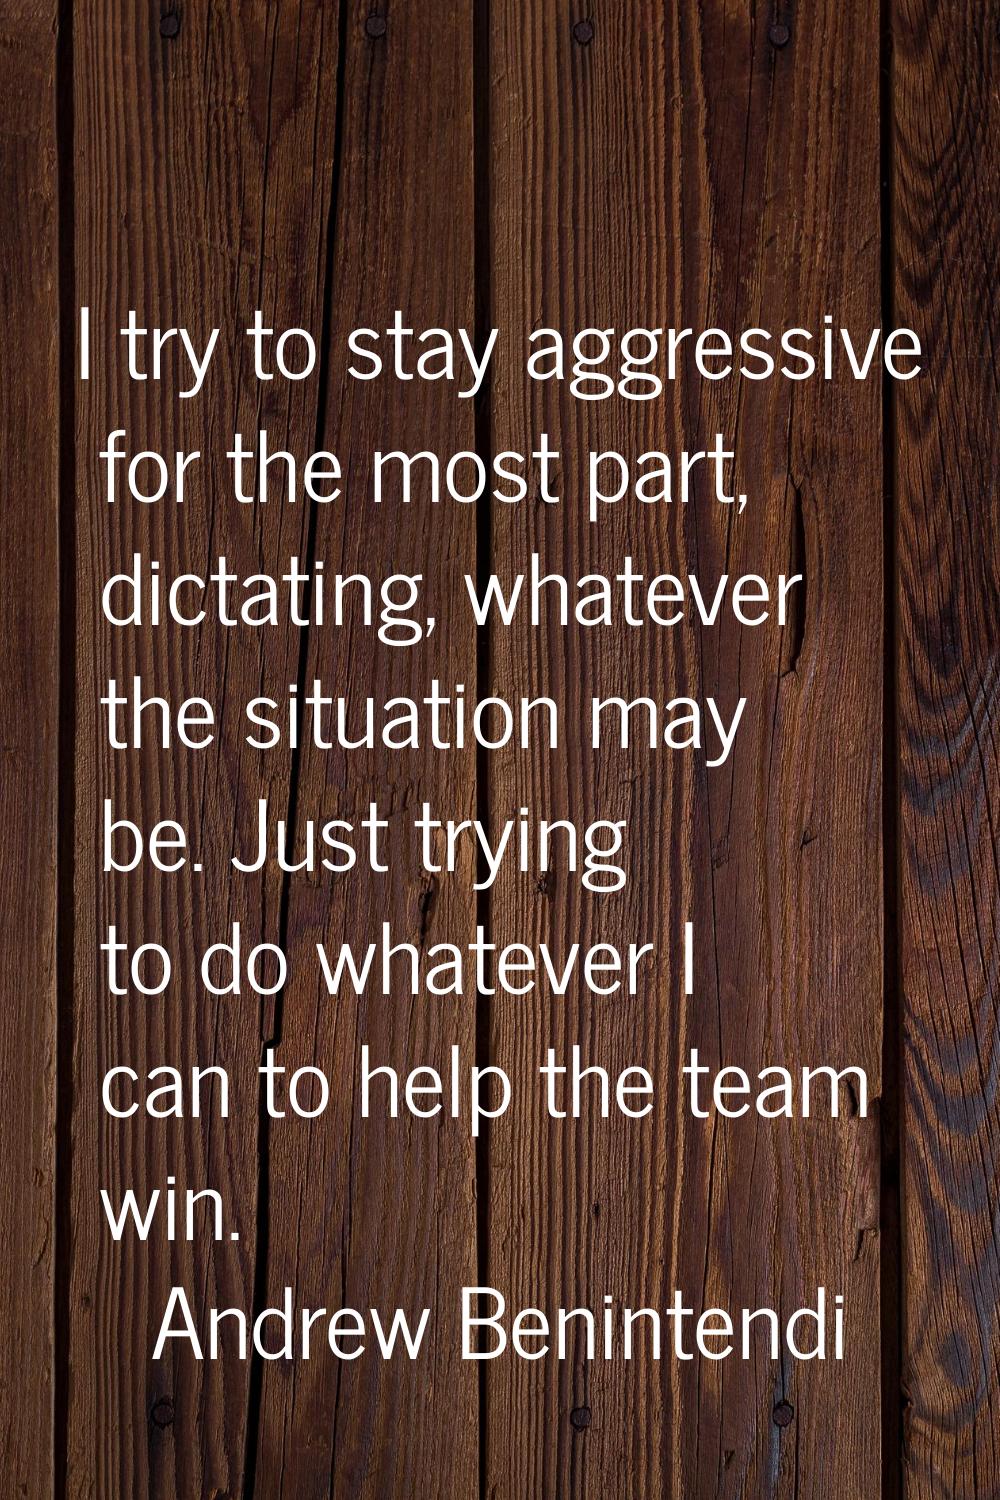 I try to stay aggressive for the most part, dictating, whatever the situation may be. Just trying t